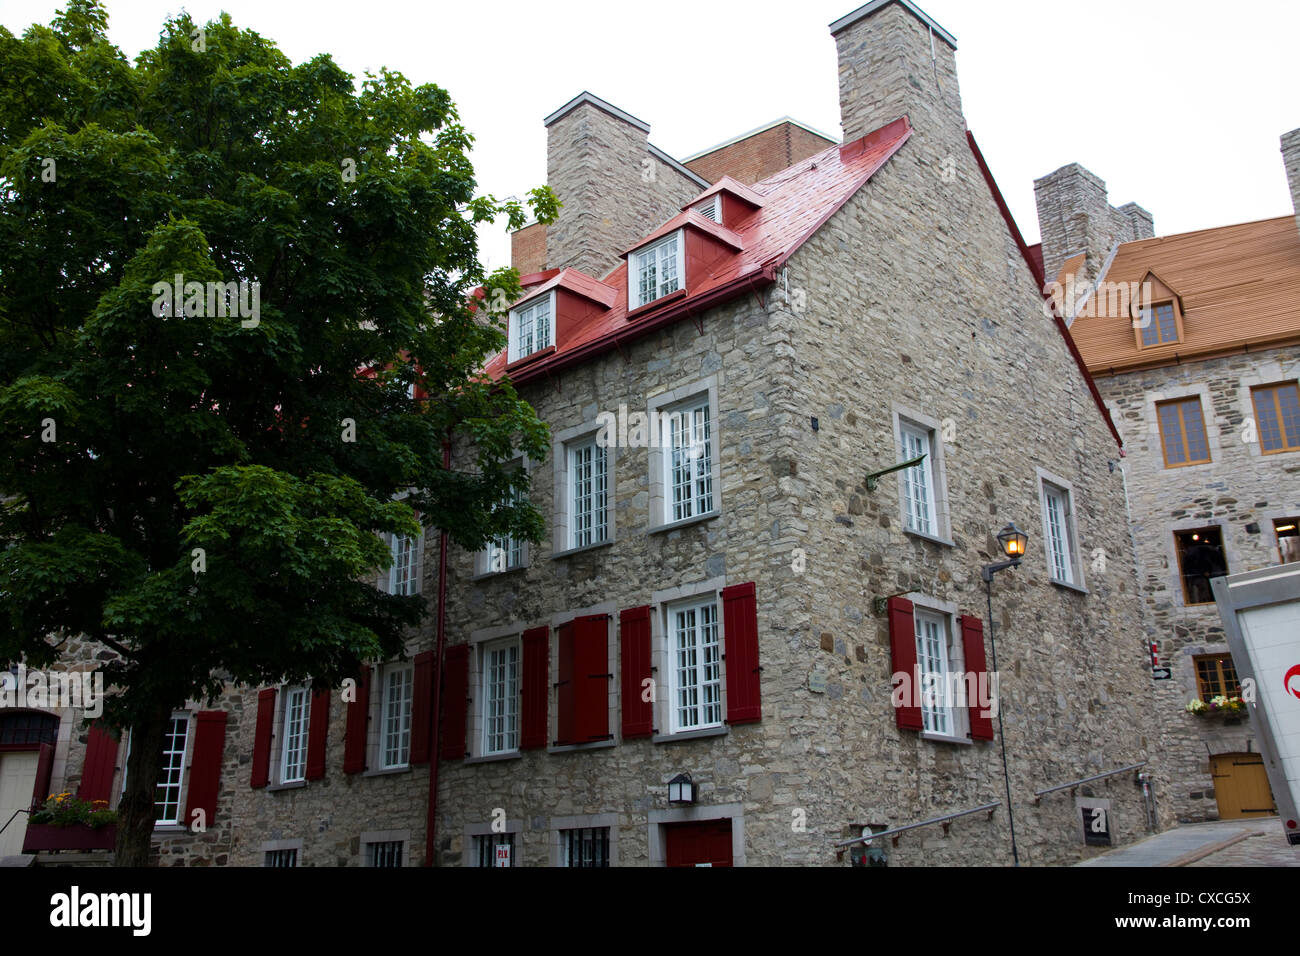 17th century stone buildings, Place Royale, Quebec City, Canada Stock Photo